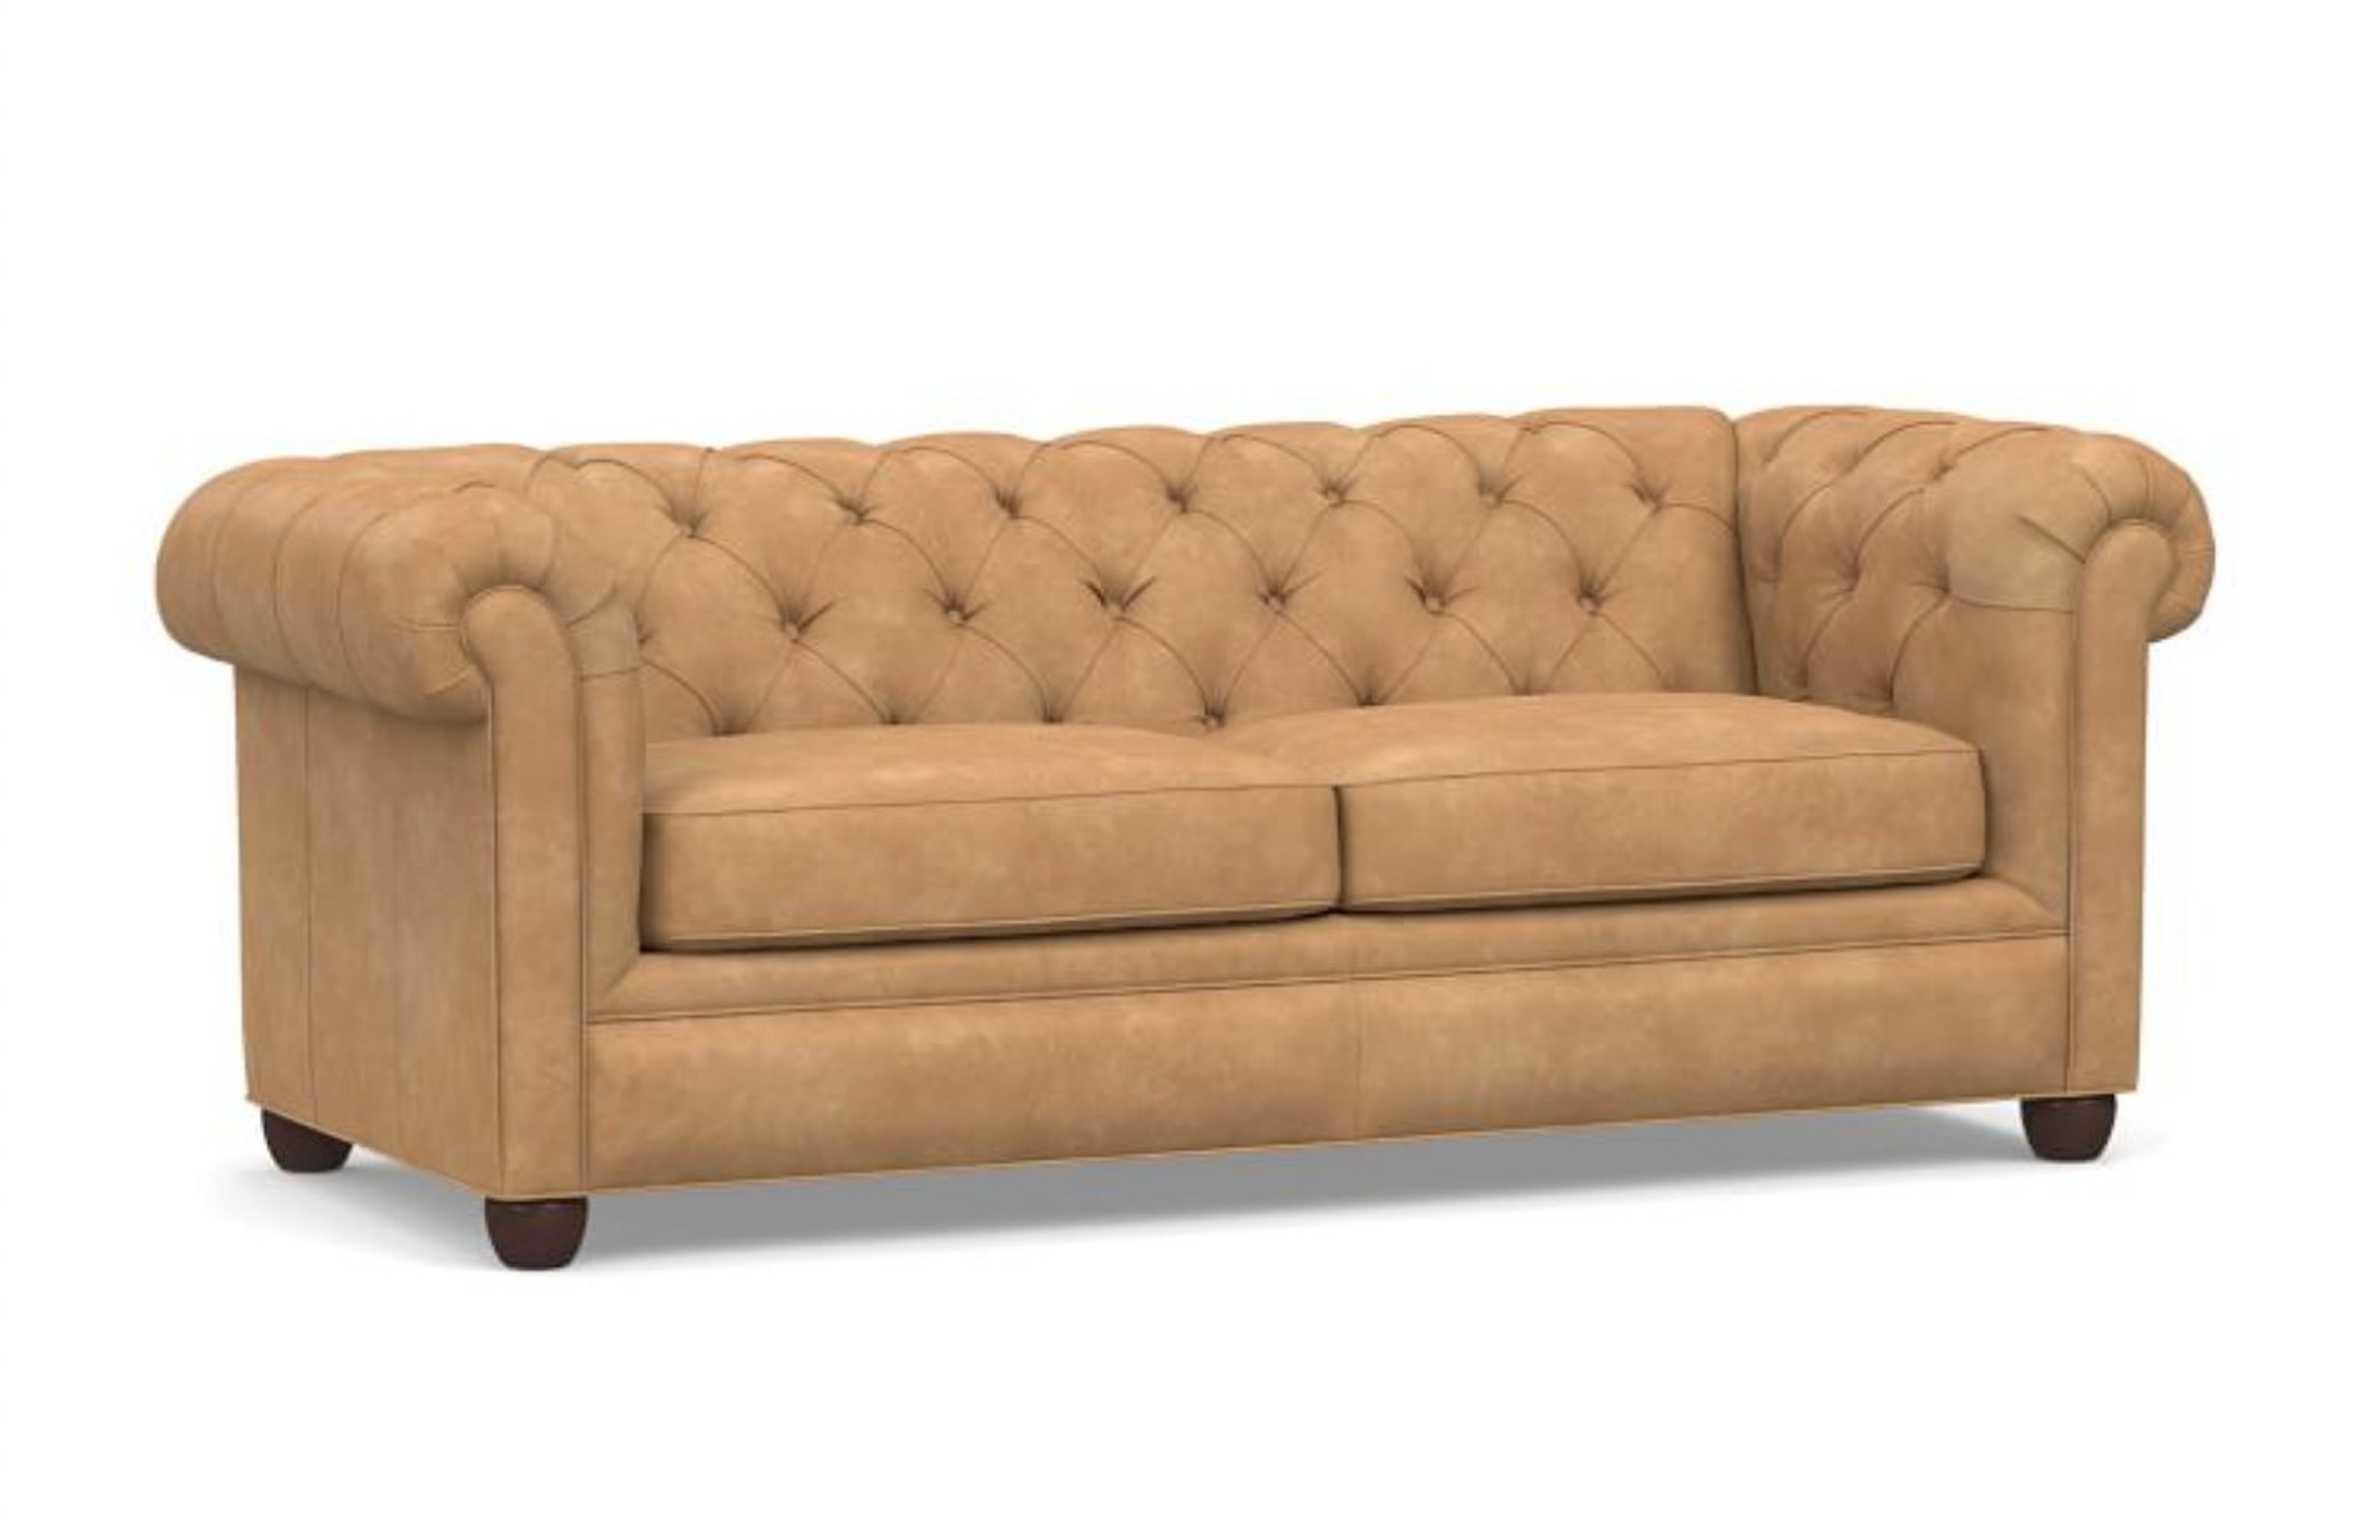 Chesterfield Roll Arm Leather Sofa 86", Polyester Wrapped Cushions, Nubuck Fawn - Pottery Barn